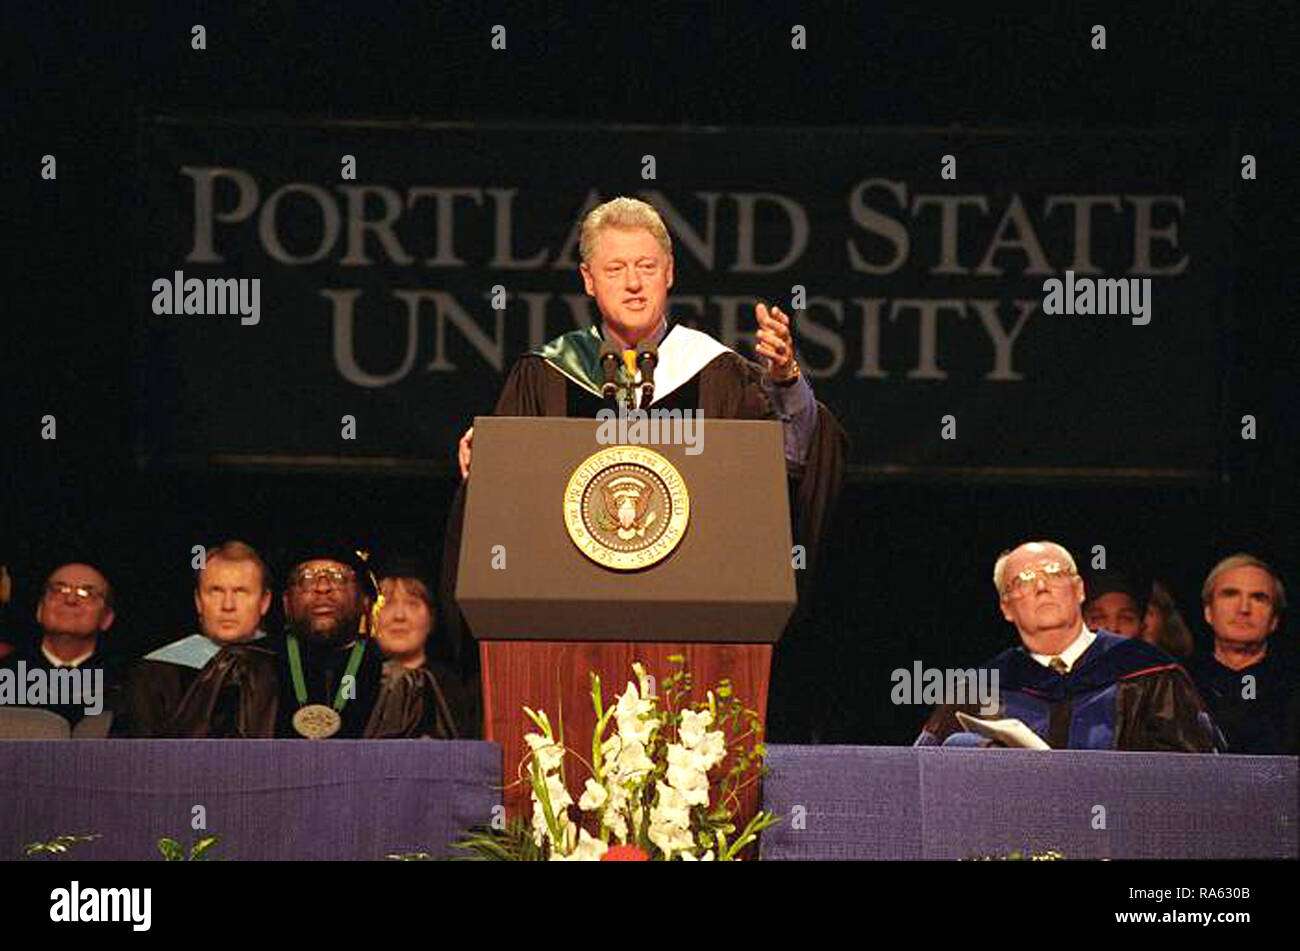 6/13/1998 Photograph of President William Jefferson Clinton Delivering the Portland State University Commencement Address Stock Photo